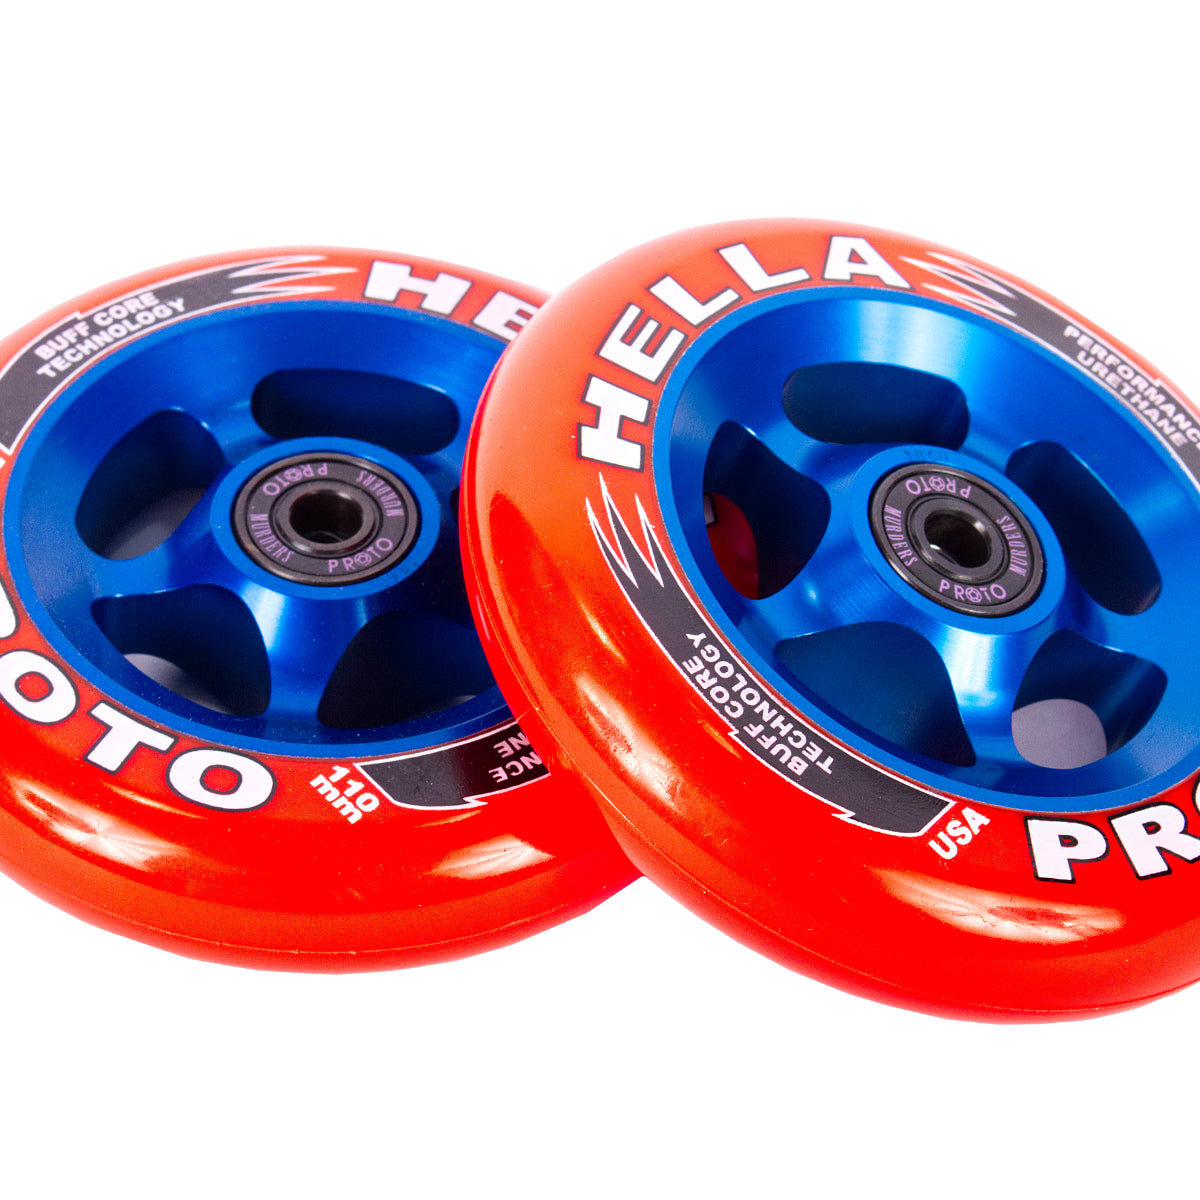 Proto X Hella Collab Grippers 110mm (PAIR) - Scooter Wheels Pair